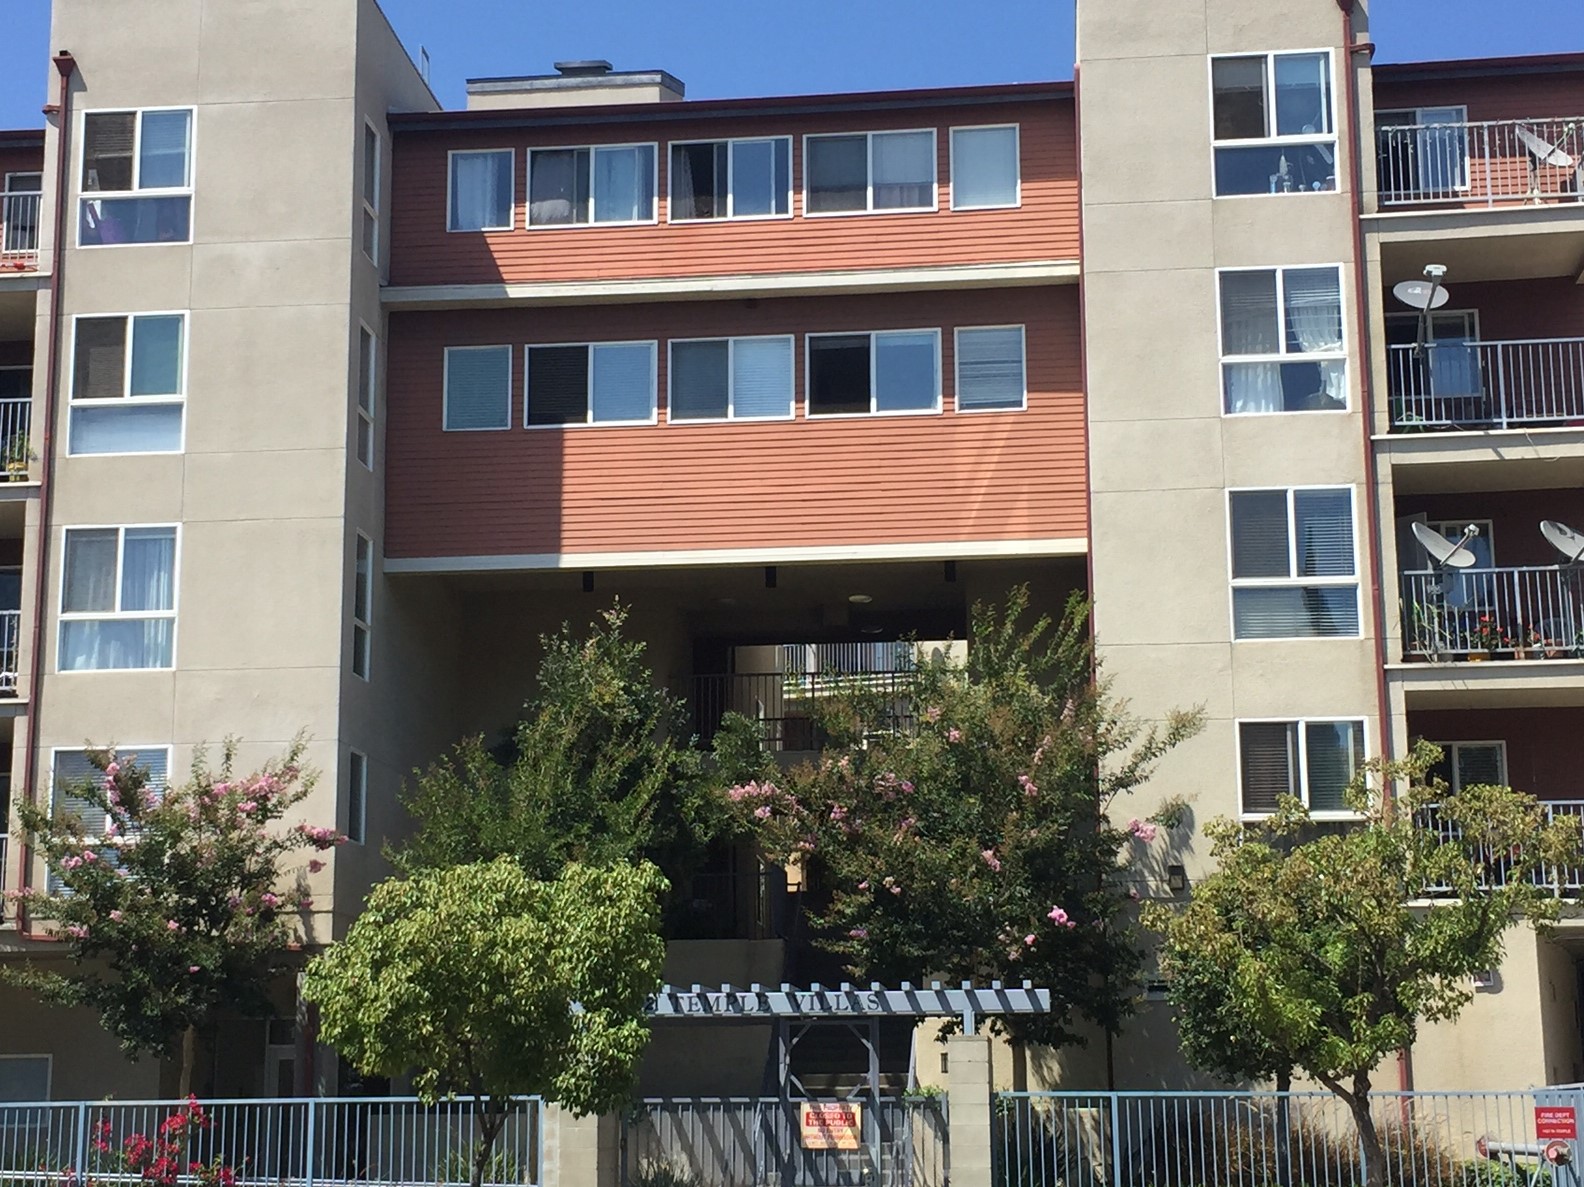 Street view of a four floor apartment building